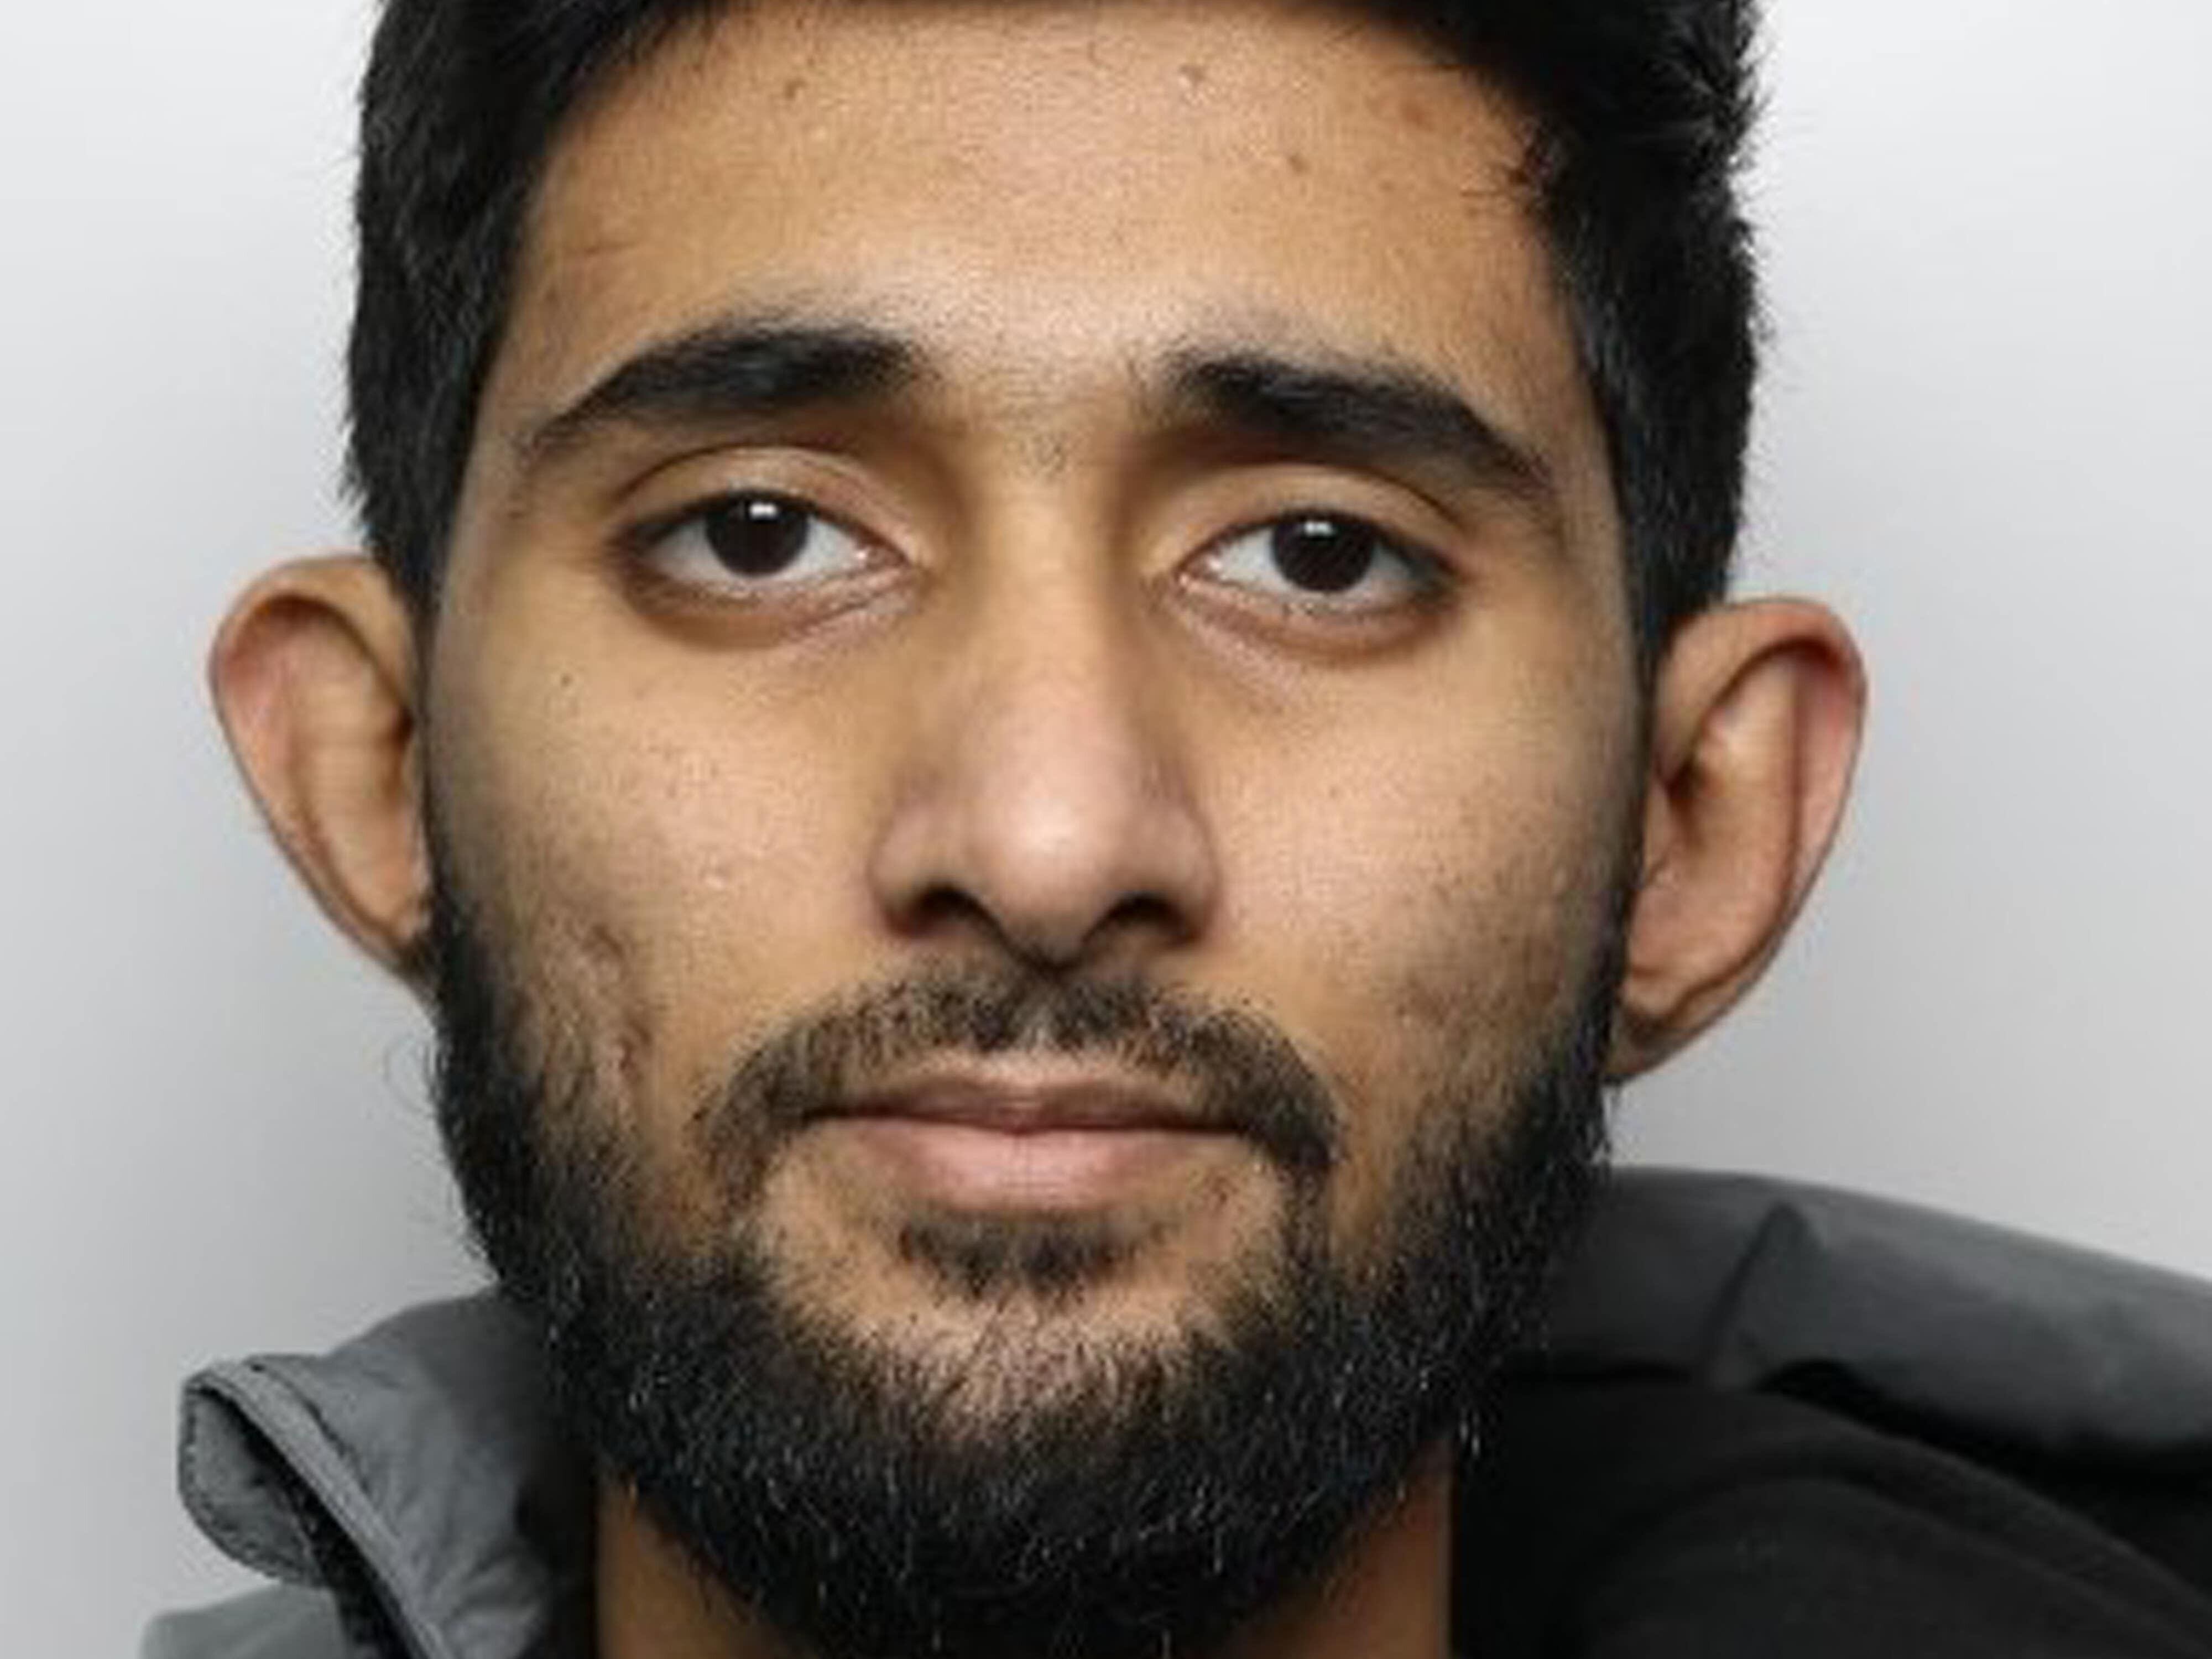 Man wanted for stabbing Bradford woman on bail for threats to kill